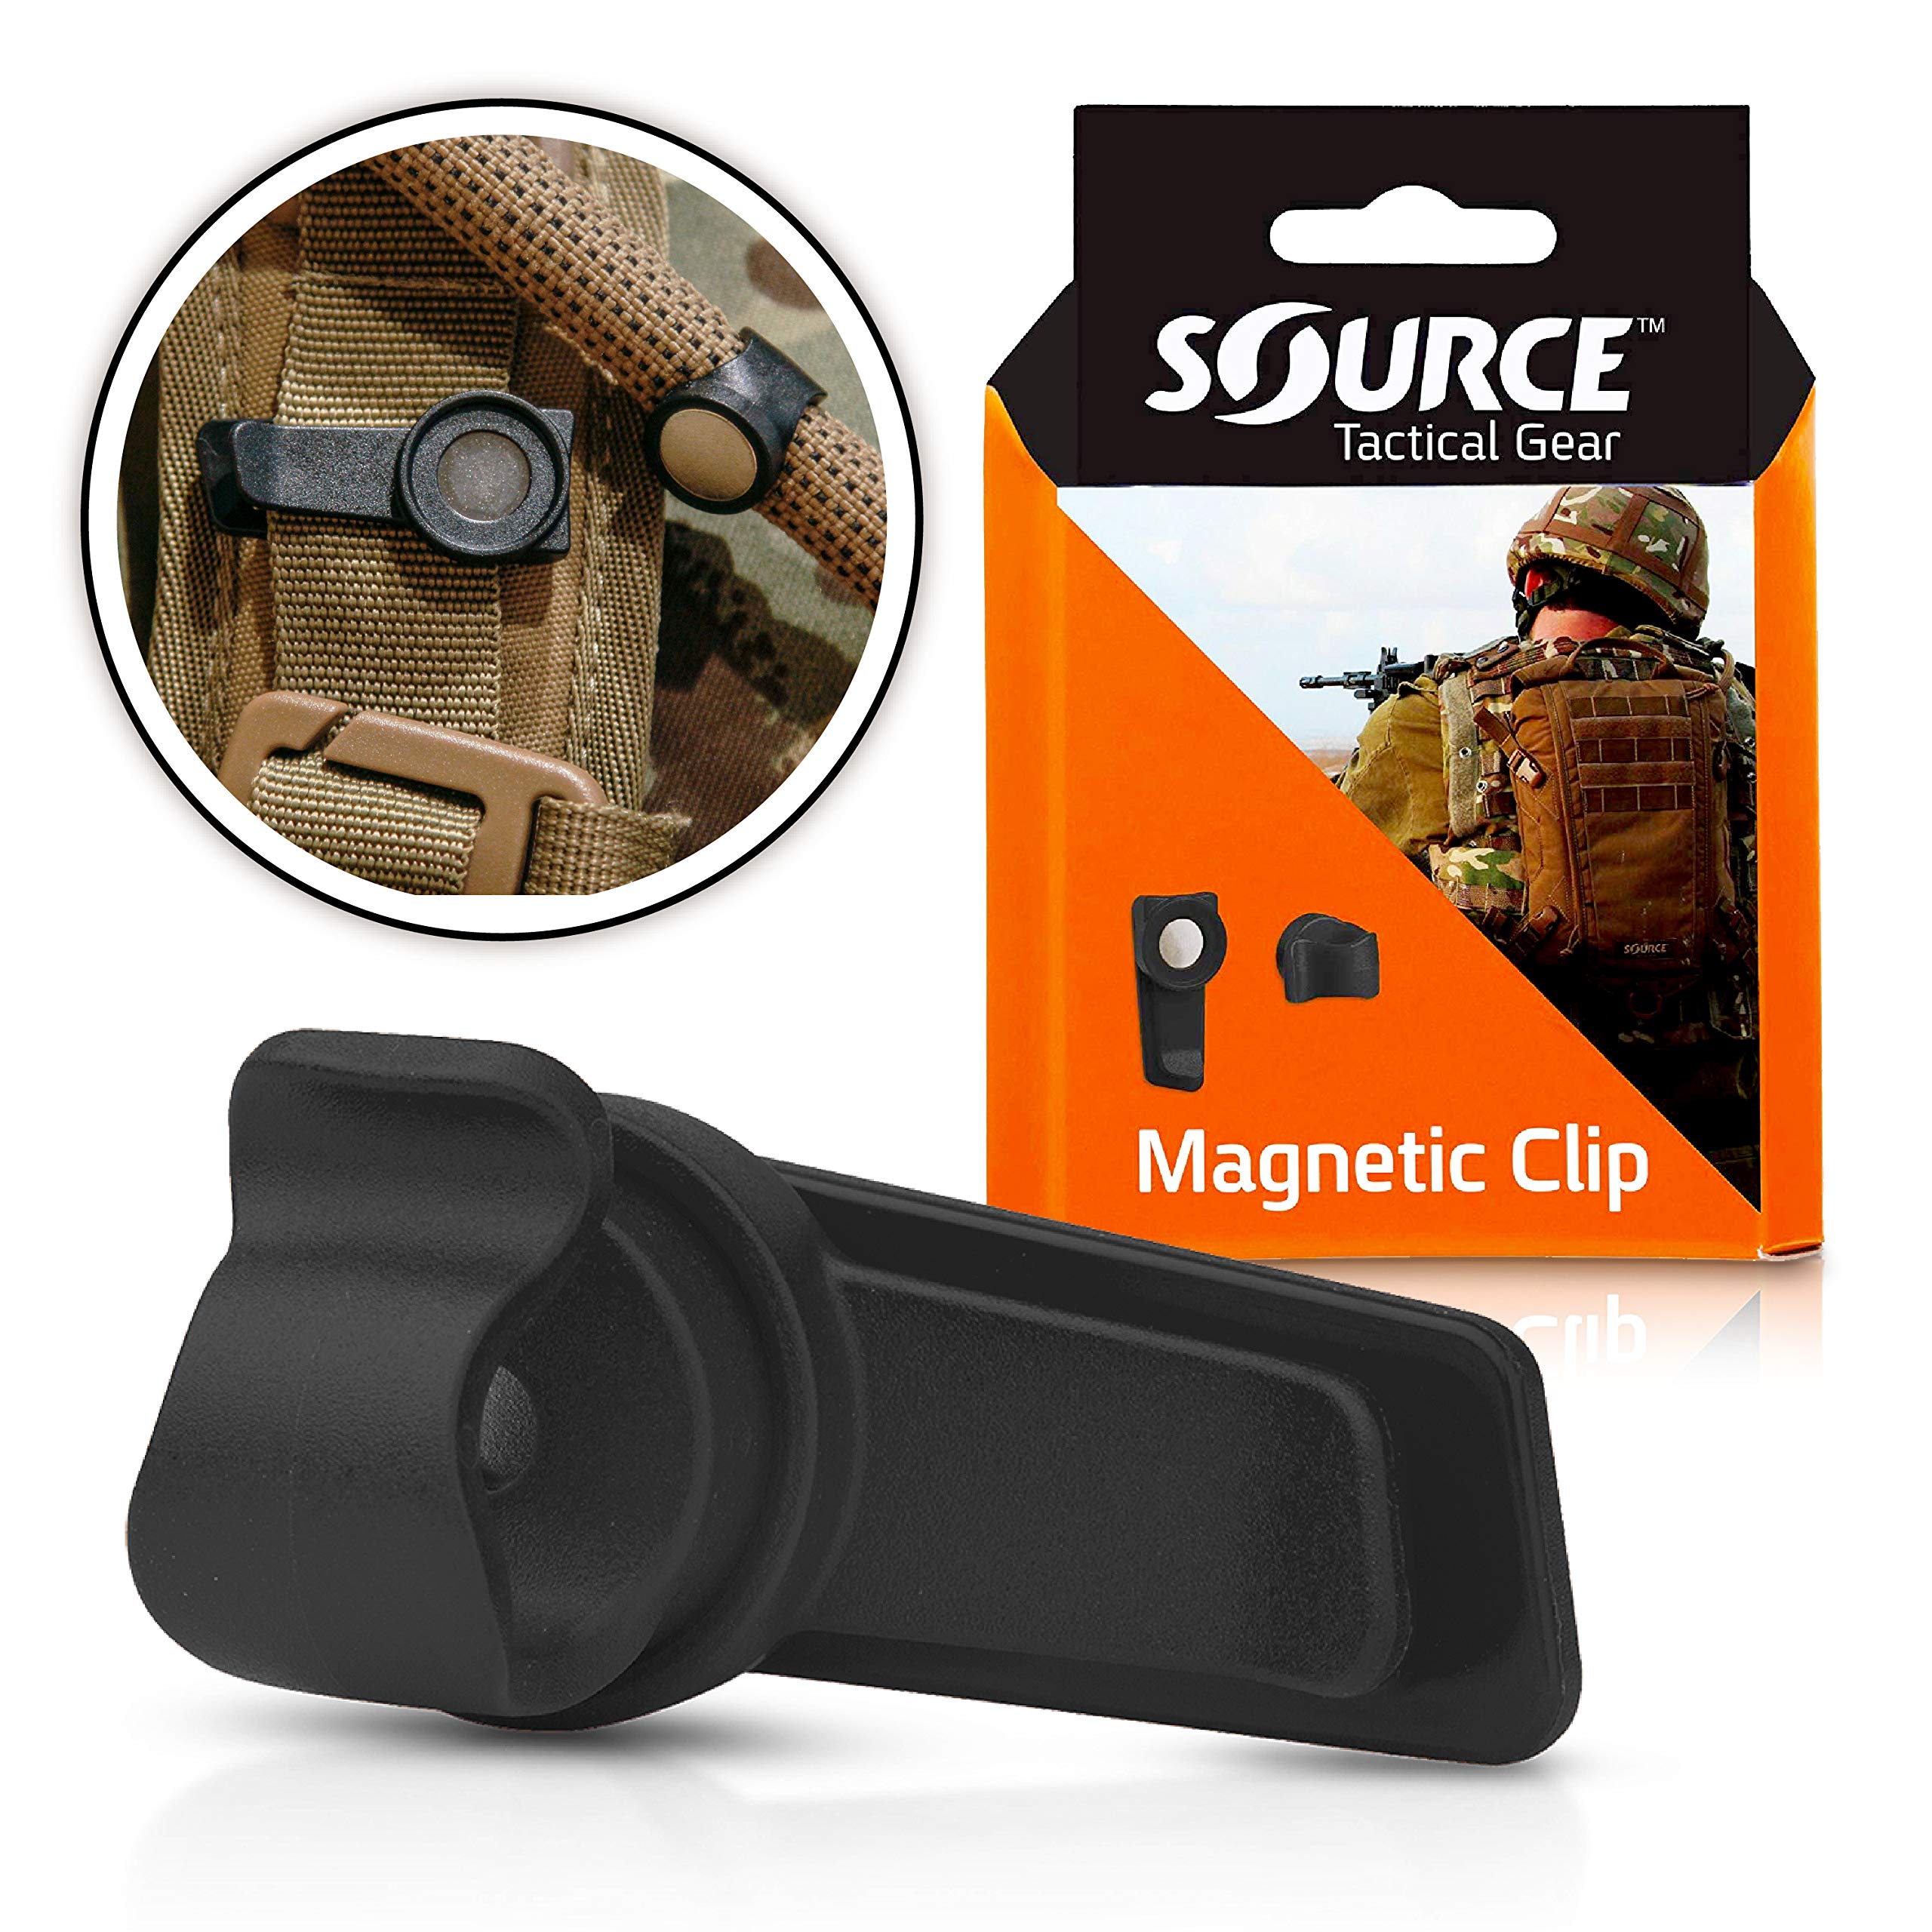 Source Tactical Gear Universal Magnetic Tube Holder Clip (Black)